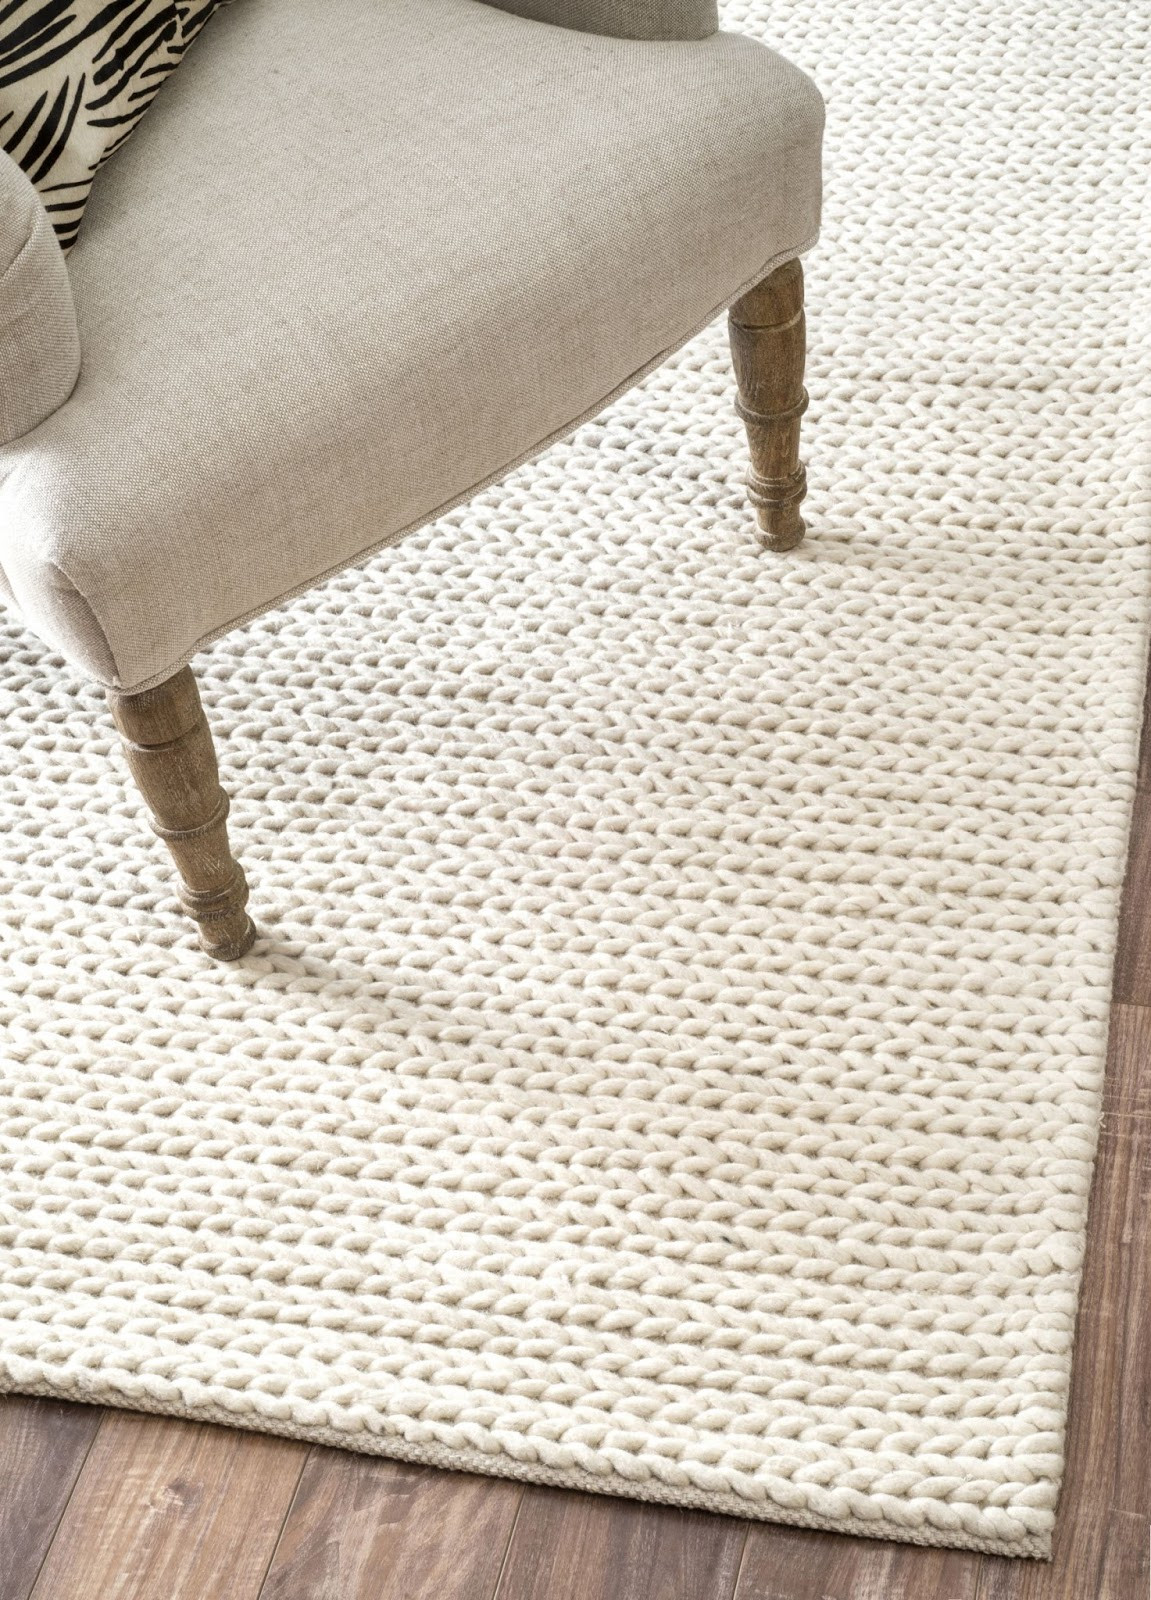 Neutral Rugs For Living Room
 Five Friday Finds Neutral and Affordable Area Rugs